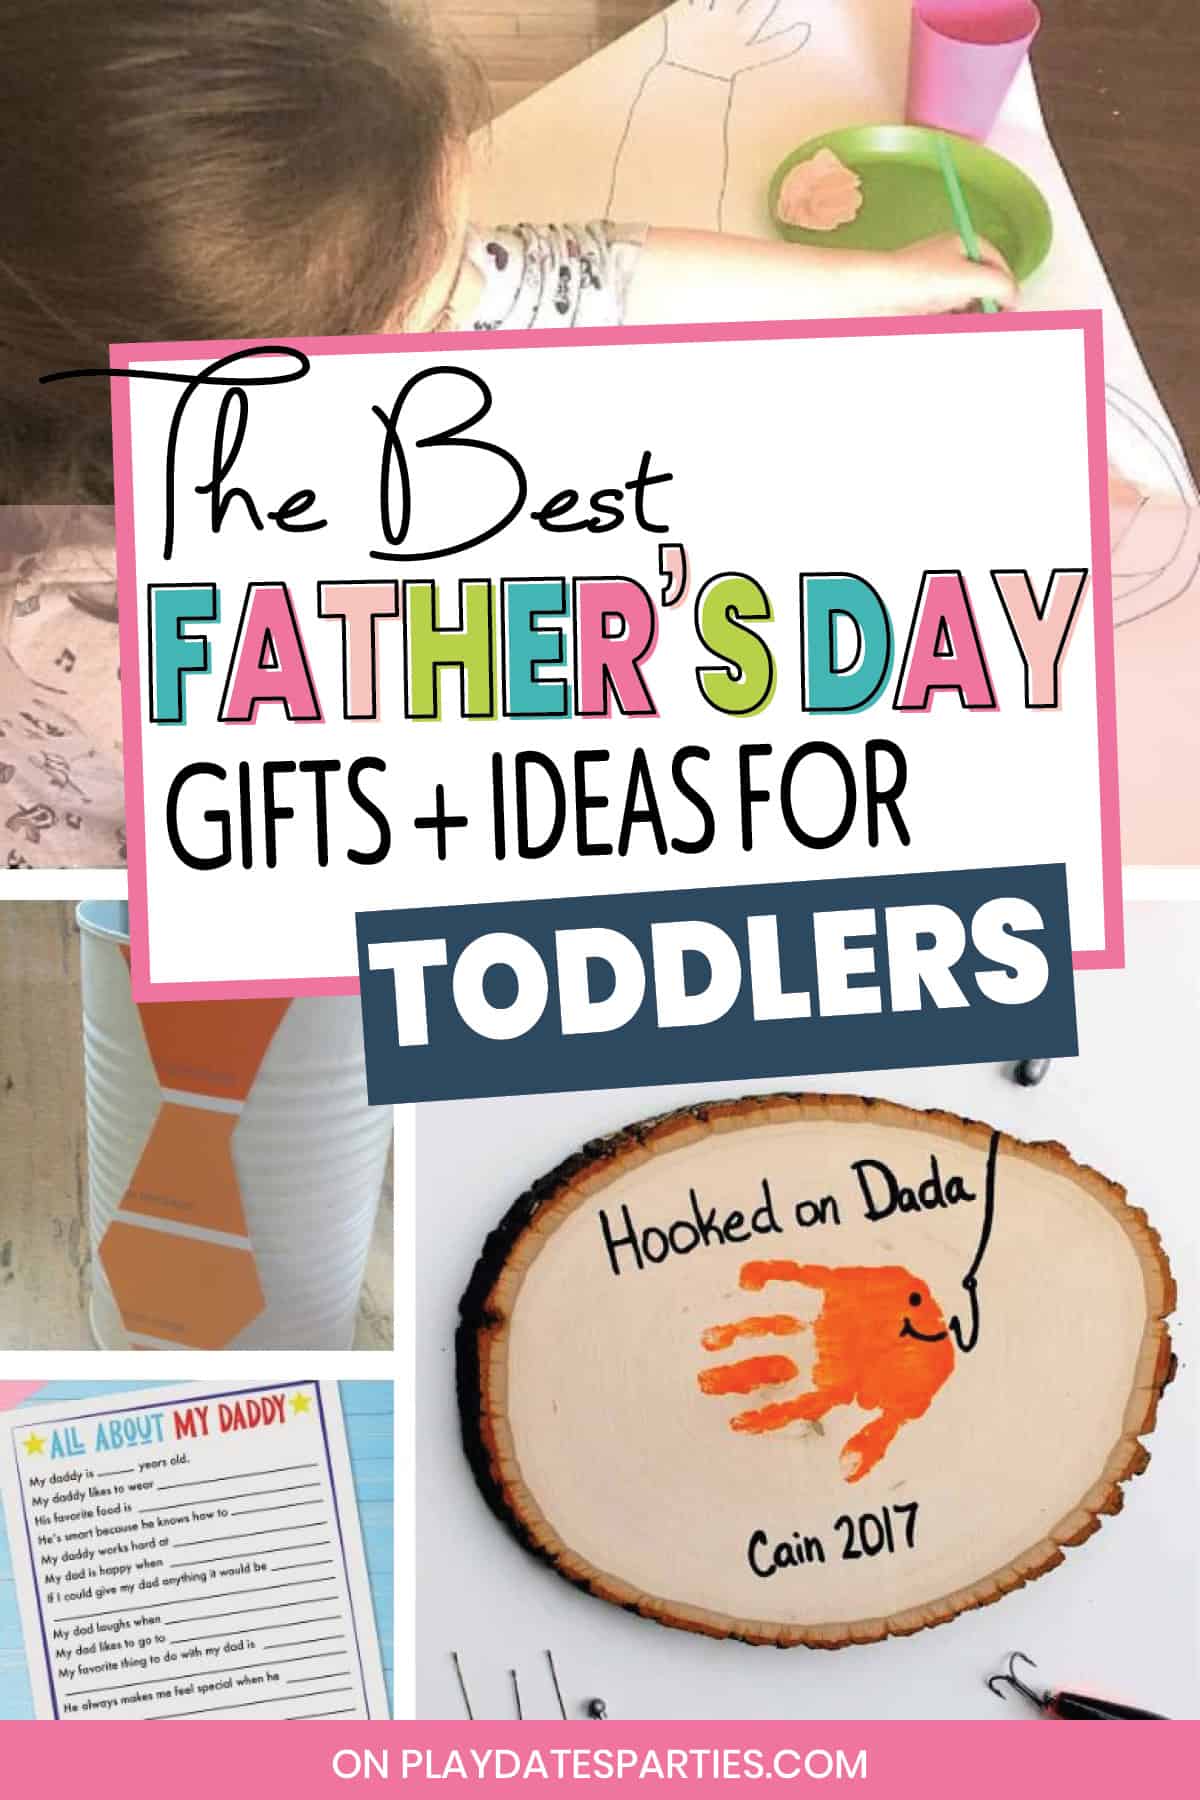 What a Dad Wants - Cool Gifts for Dad - Kelly Elko